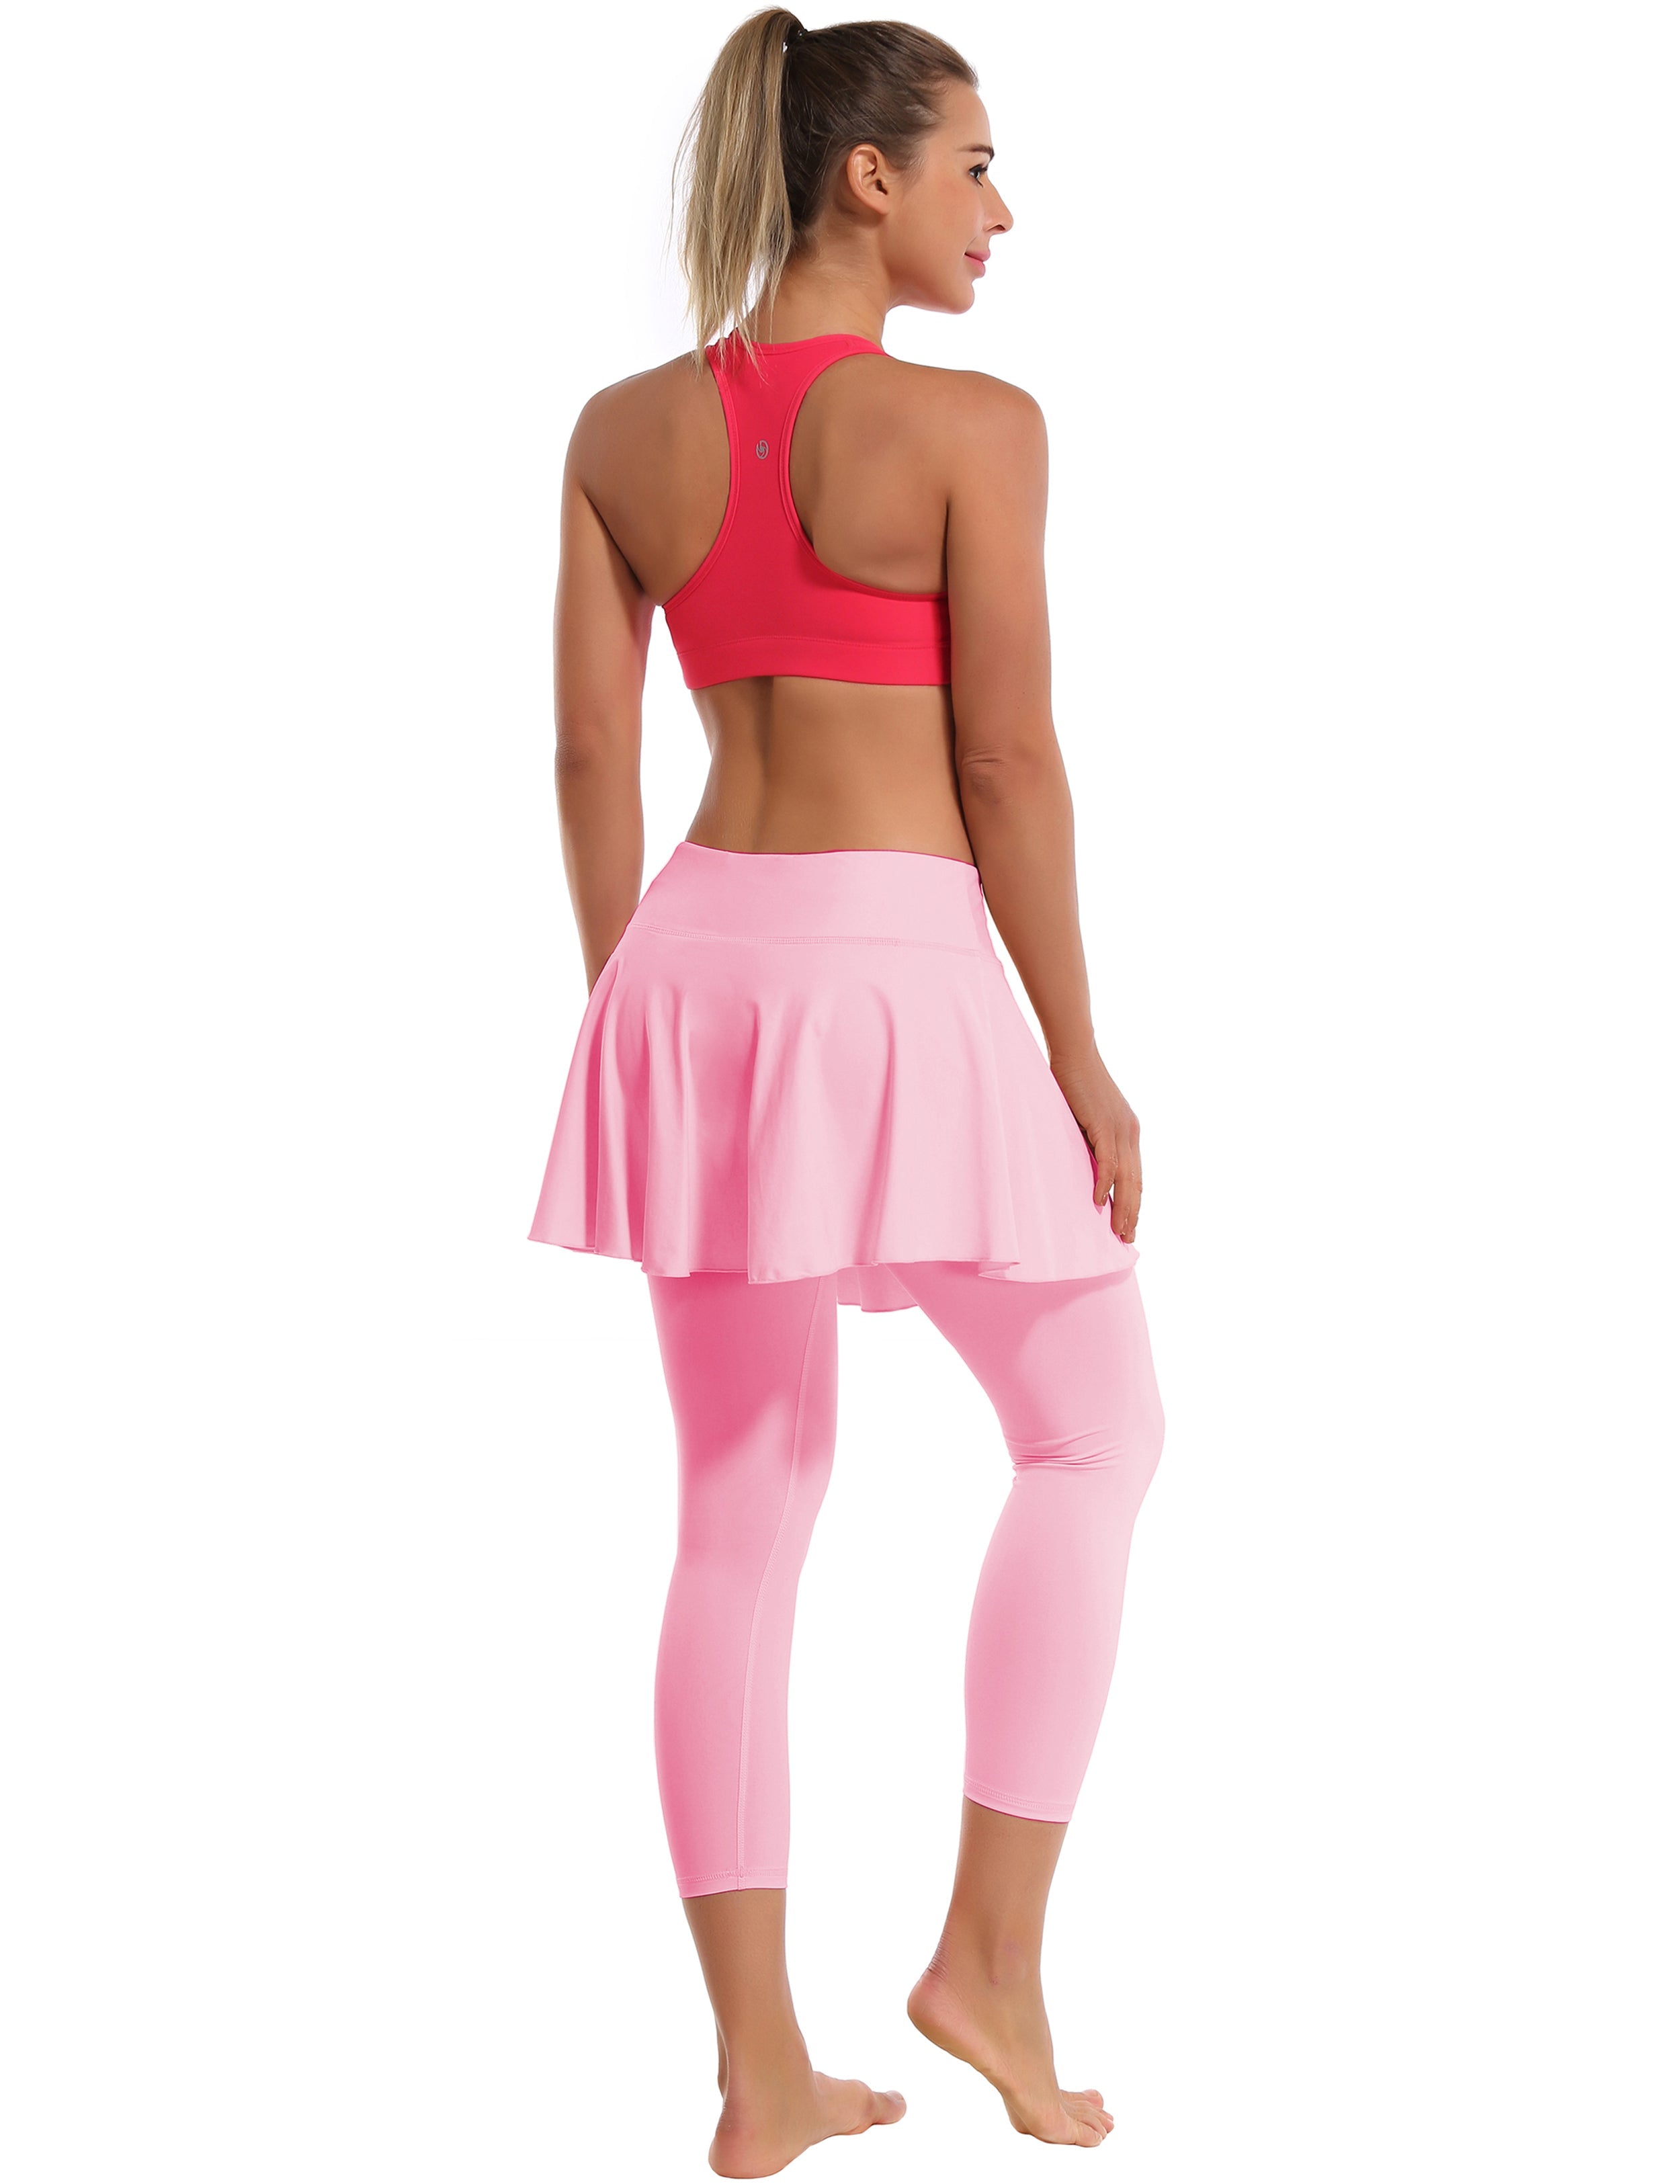 19" Capris Tennis Golf Skirted Leggings with Pockets lightpink 80%Nylon/20%Spandex UPF 50+ sun protection Elastic closure Lightweight, Wrinkle Moisture wicking Quick drying Secure & comfortable two layer Hidden pocket